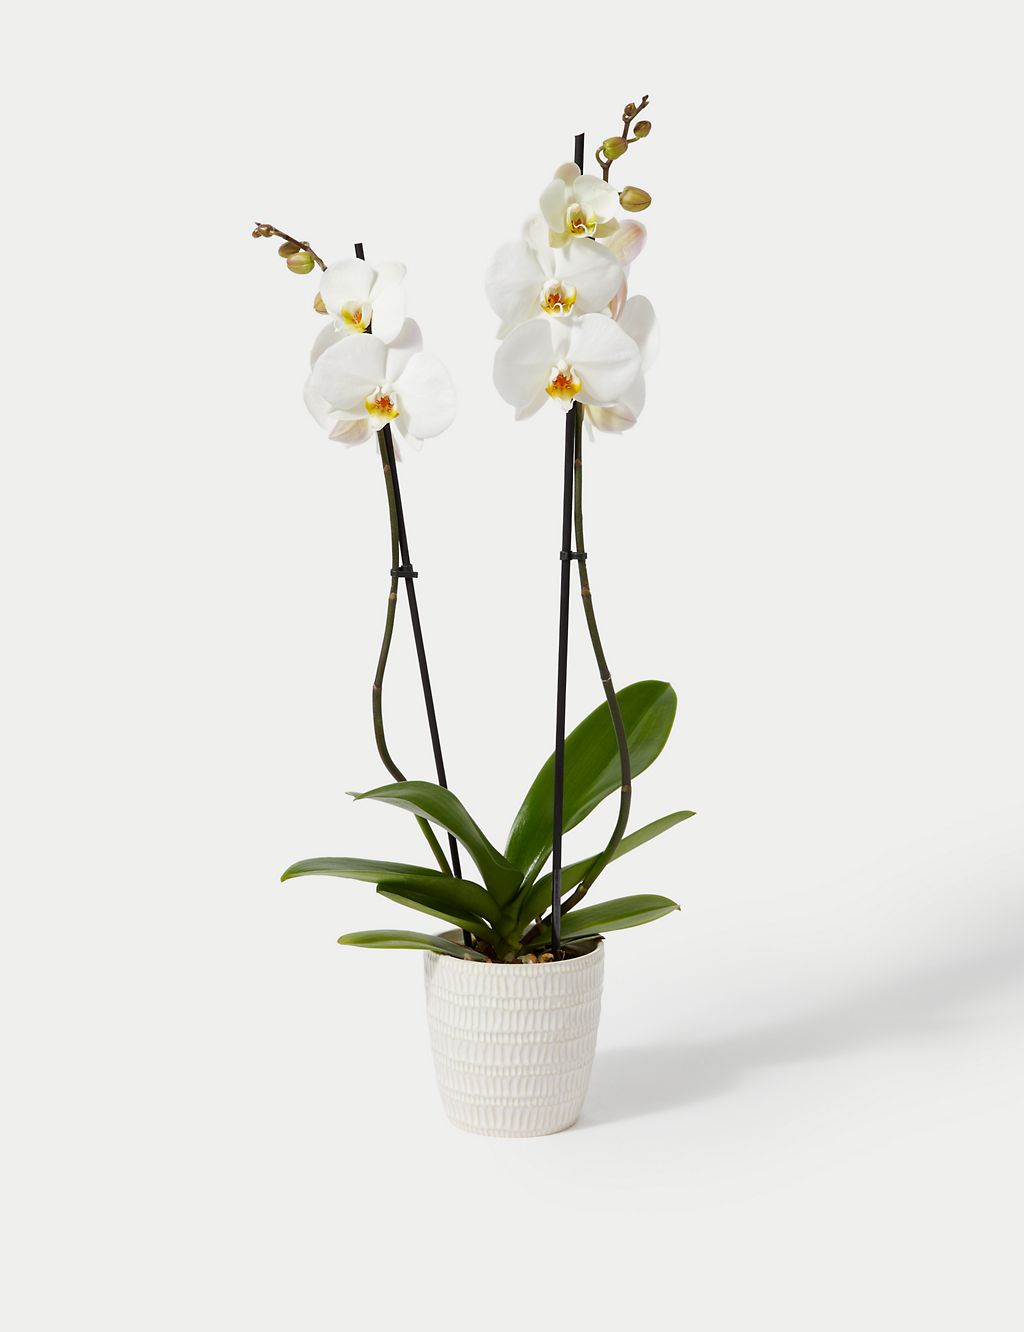 Large White Phalaenopsis Orchid in Ceramic Pot 1 of 4